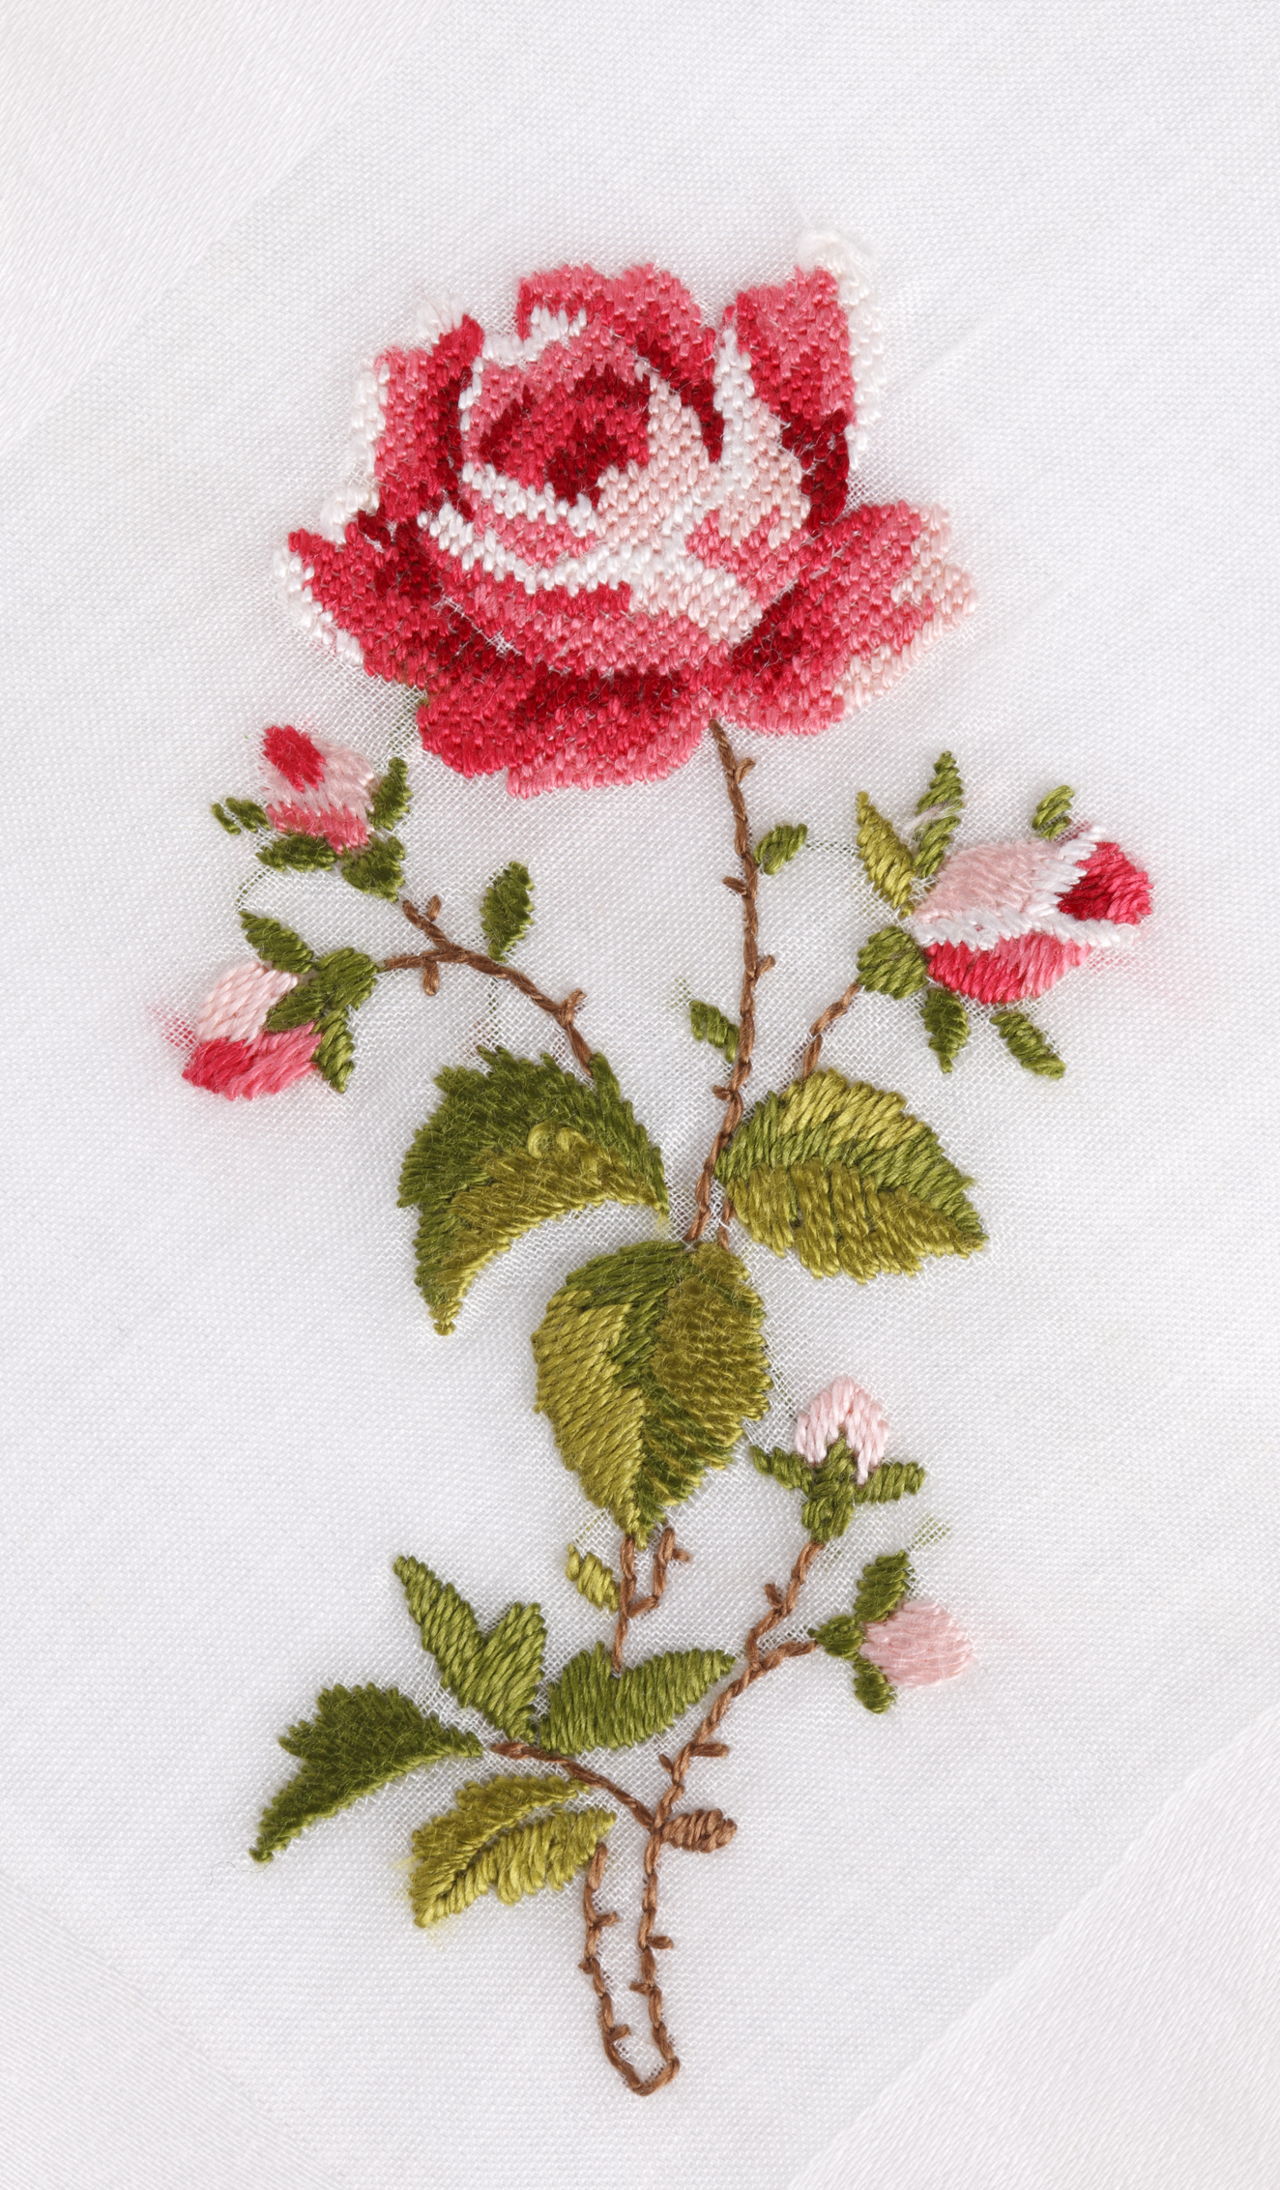 The Wonderful History of Embroidery Through the Ages - Hobby Zeal